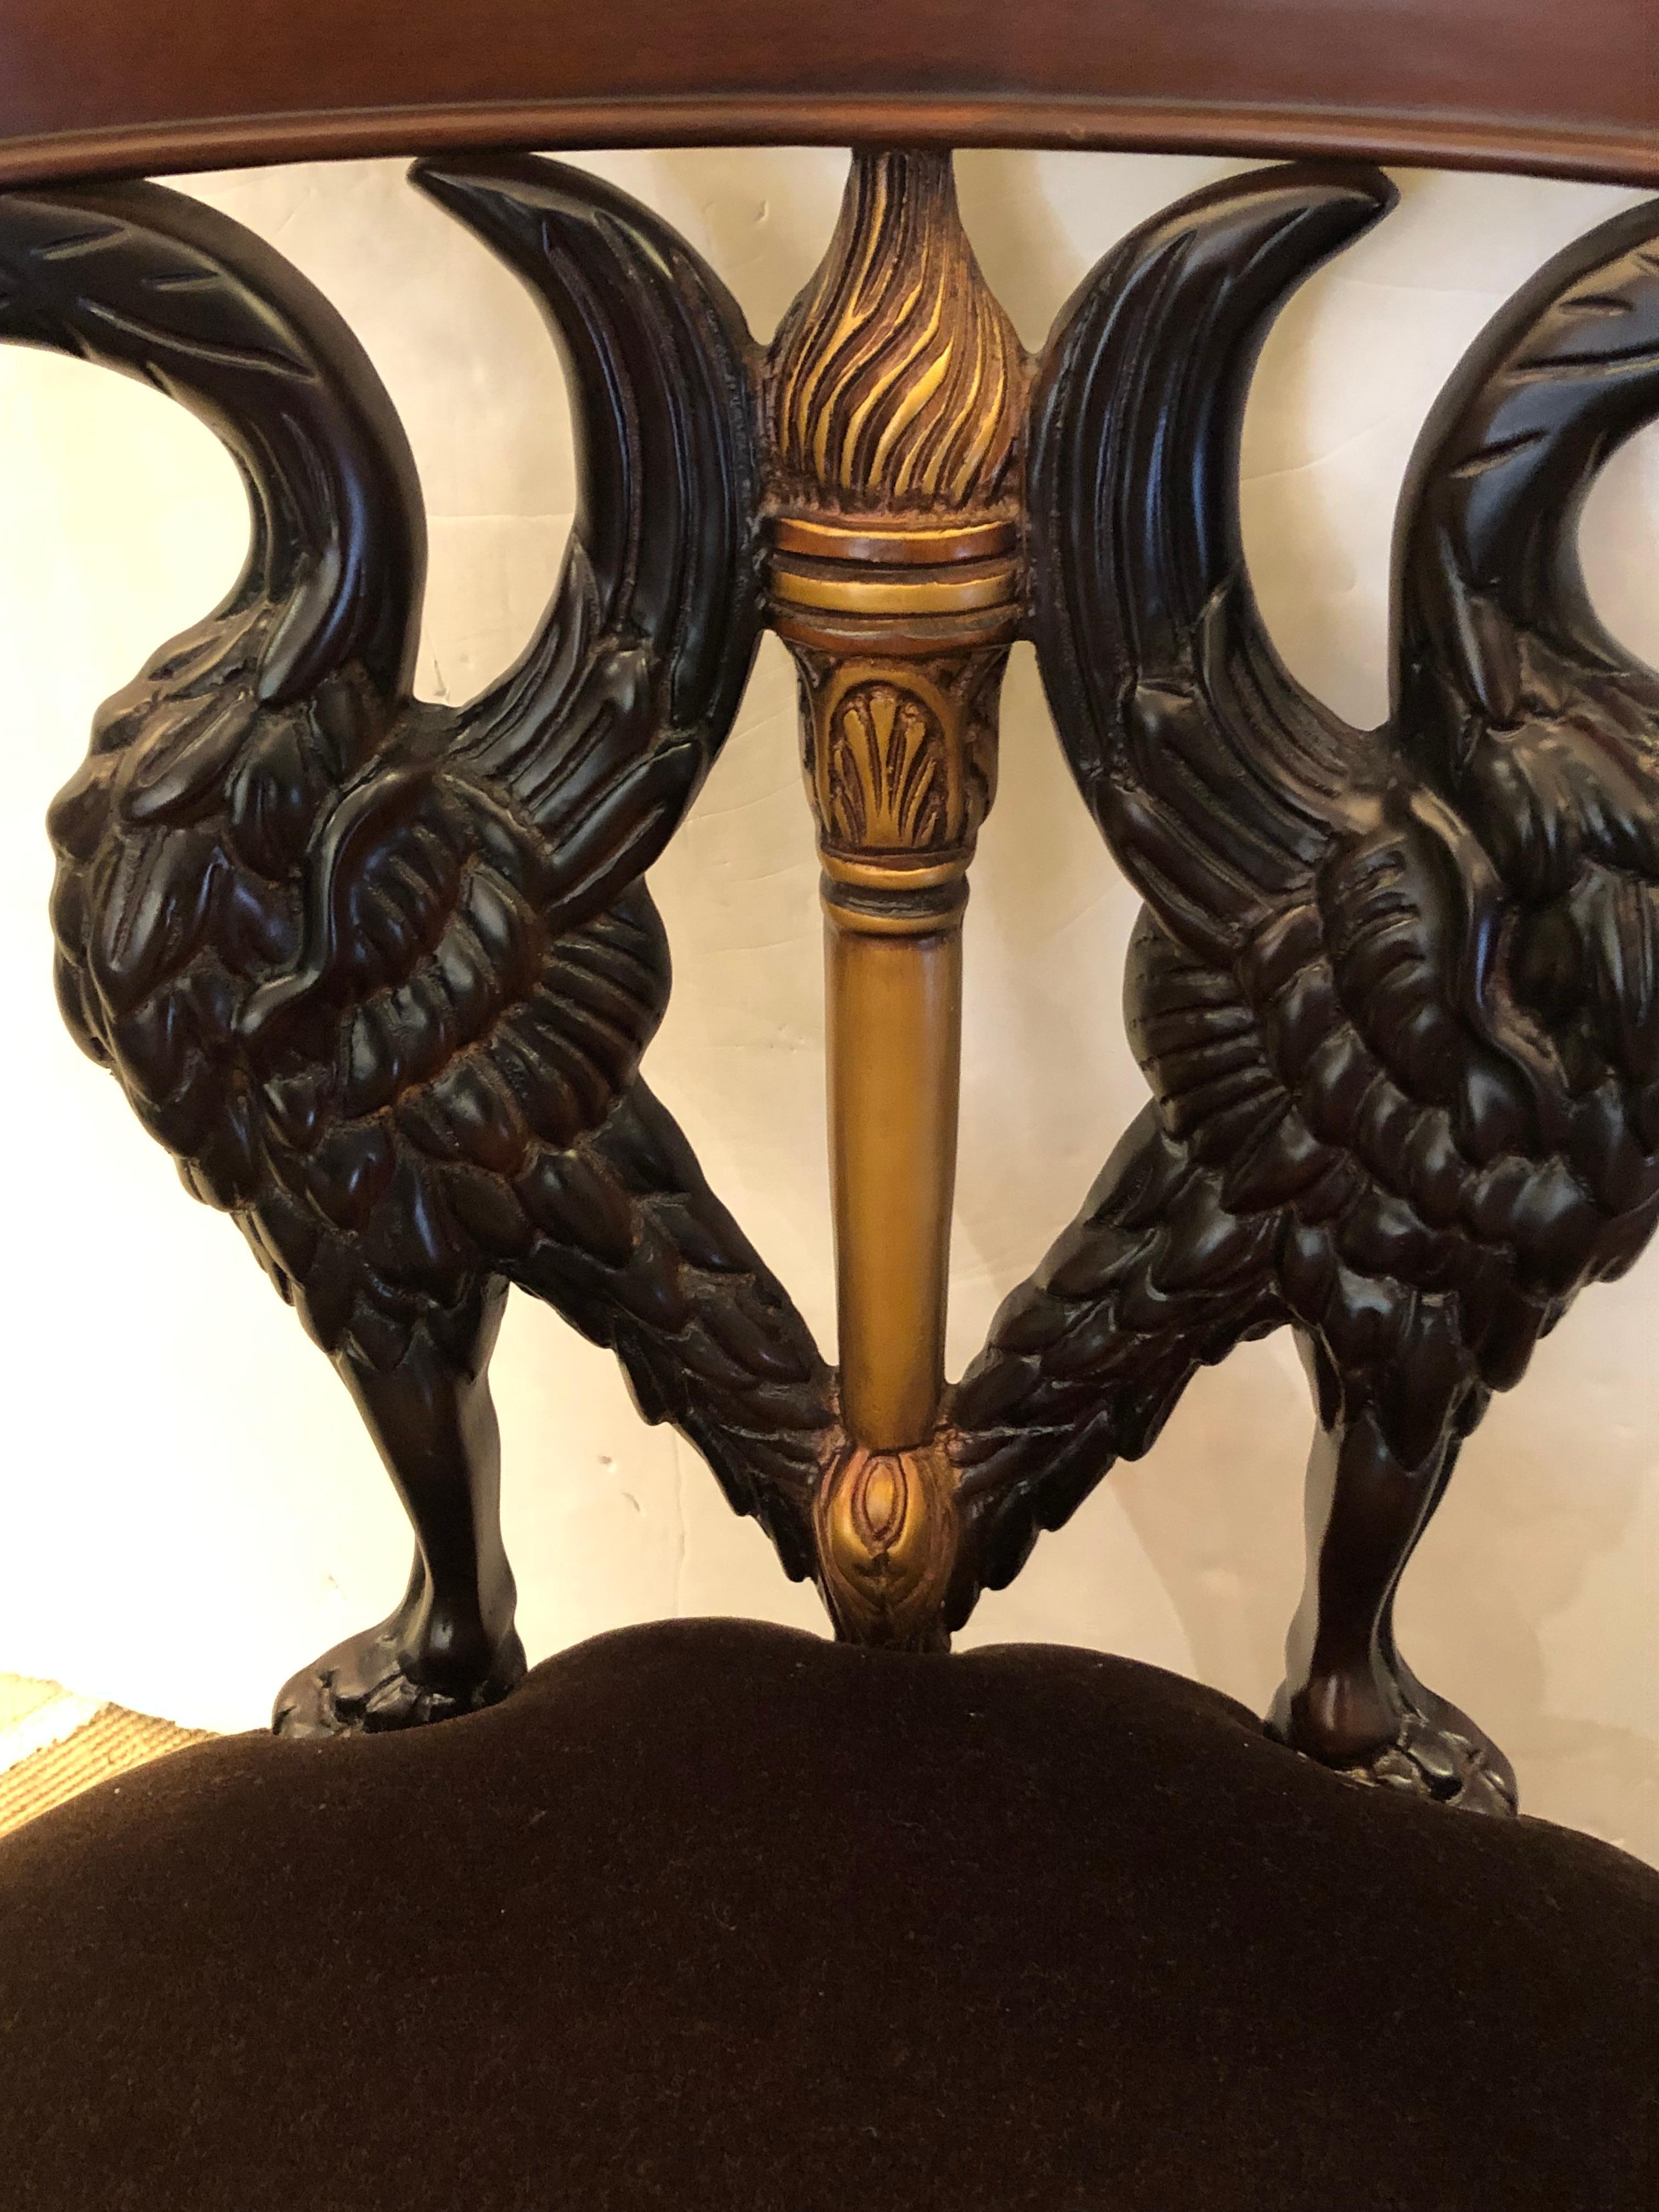 Dramatic carved wood armchair in mahogany, ebonized wood and gilded elements having elegant swan motif with arms that are the sinous necks of the birds.  Incredible flourishes in gold include a central torch, leaf like handrests and carved fan